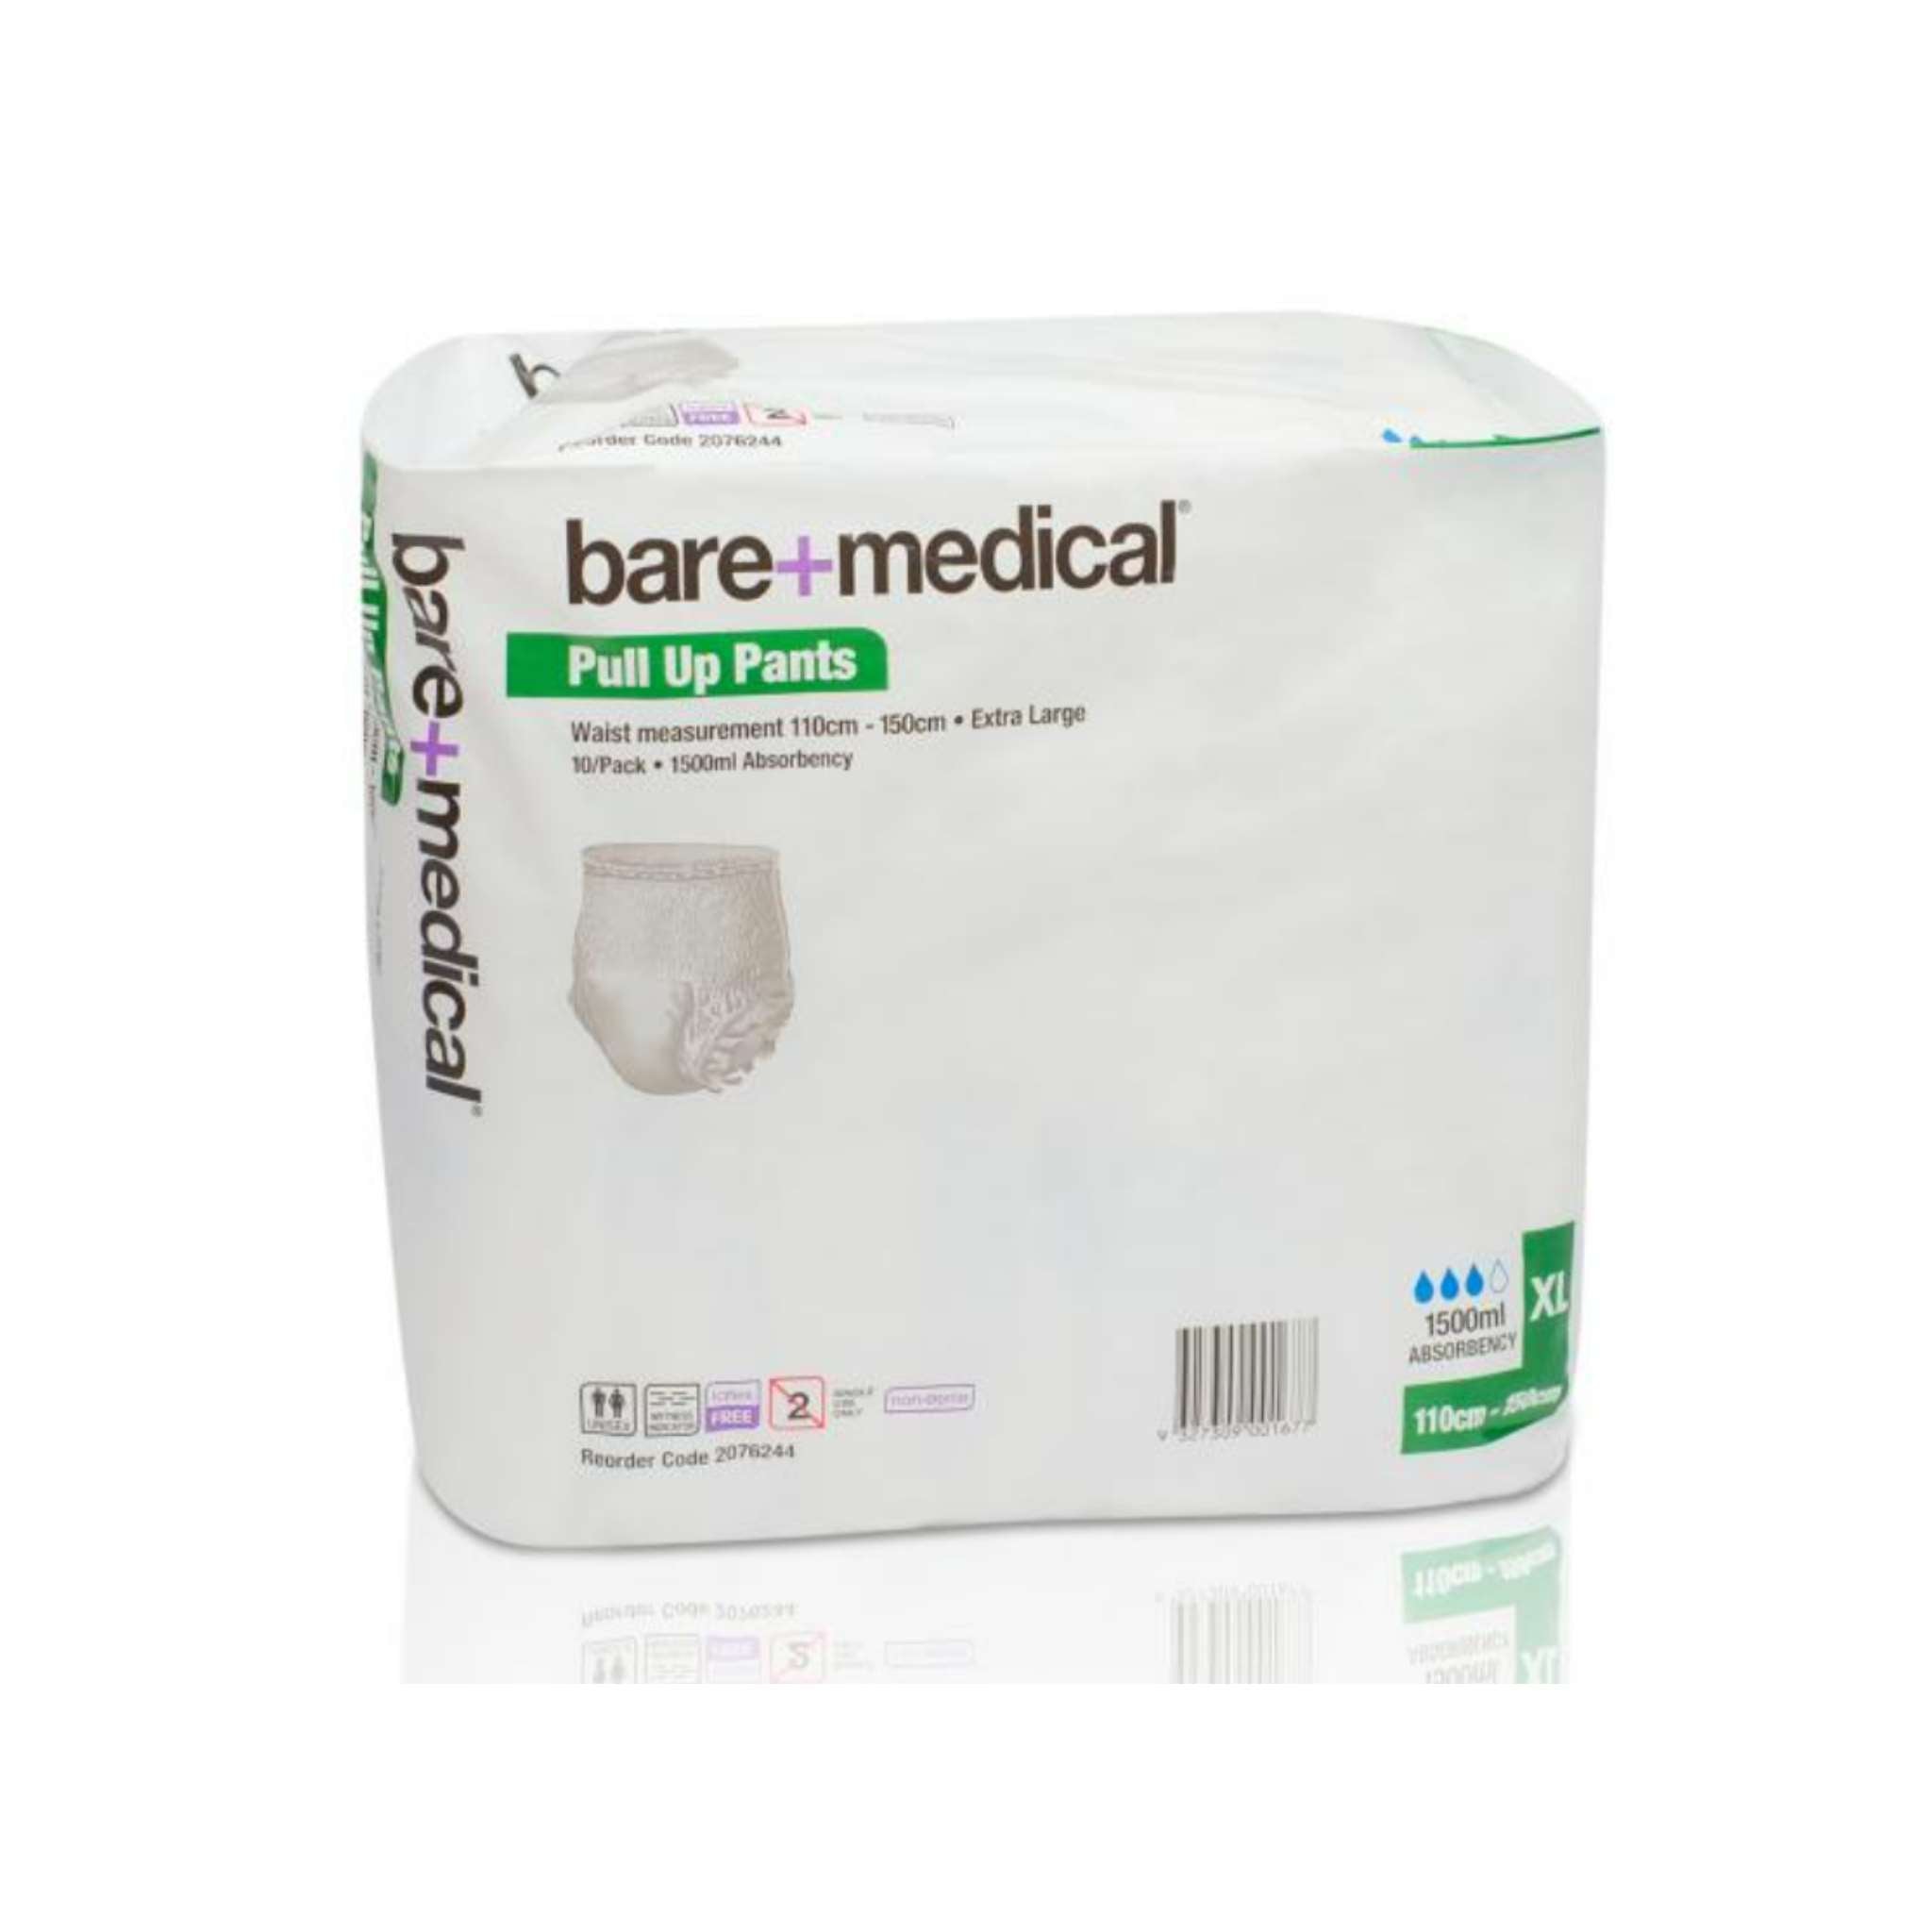 Bare Medical Pull-up Pant 1500ml - X-Large, Packet – Aged Care & Medical